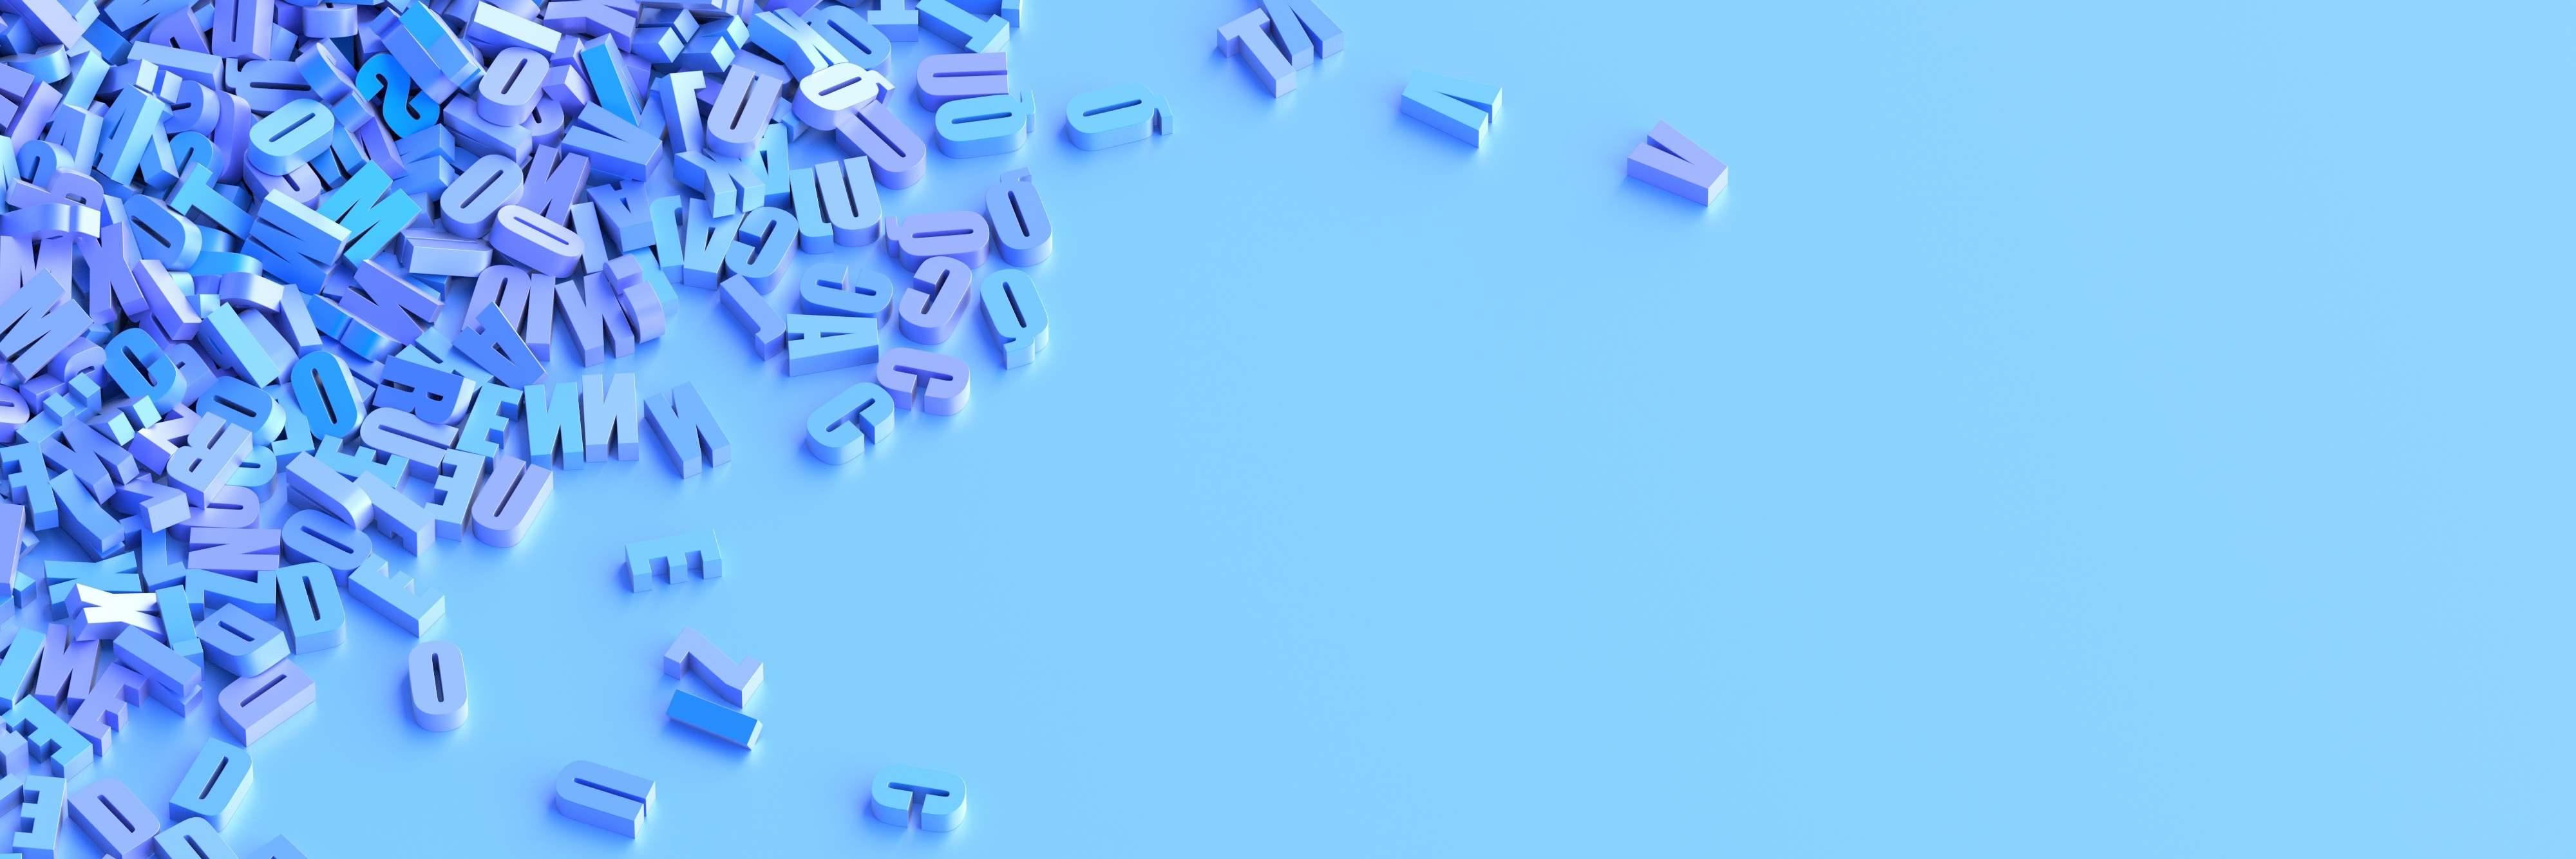 Letter blocks spilling out into a jumbled word on a blue surface 